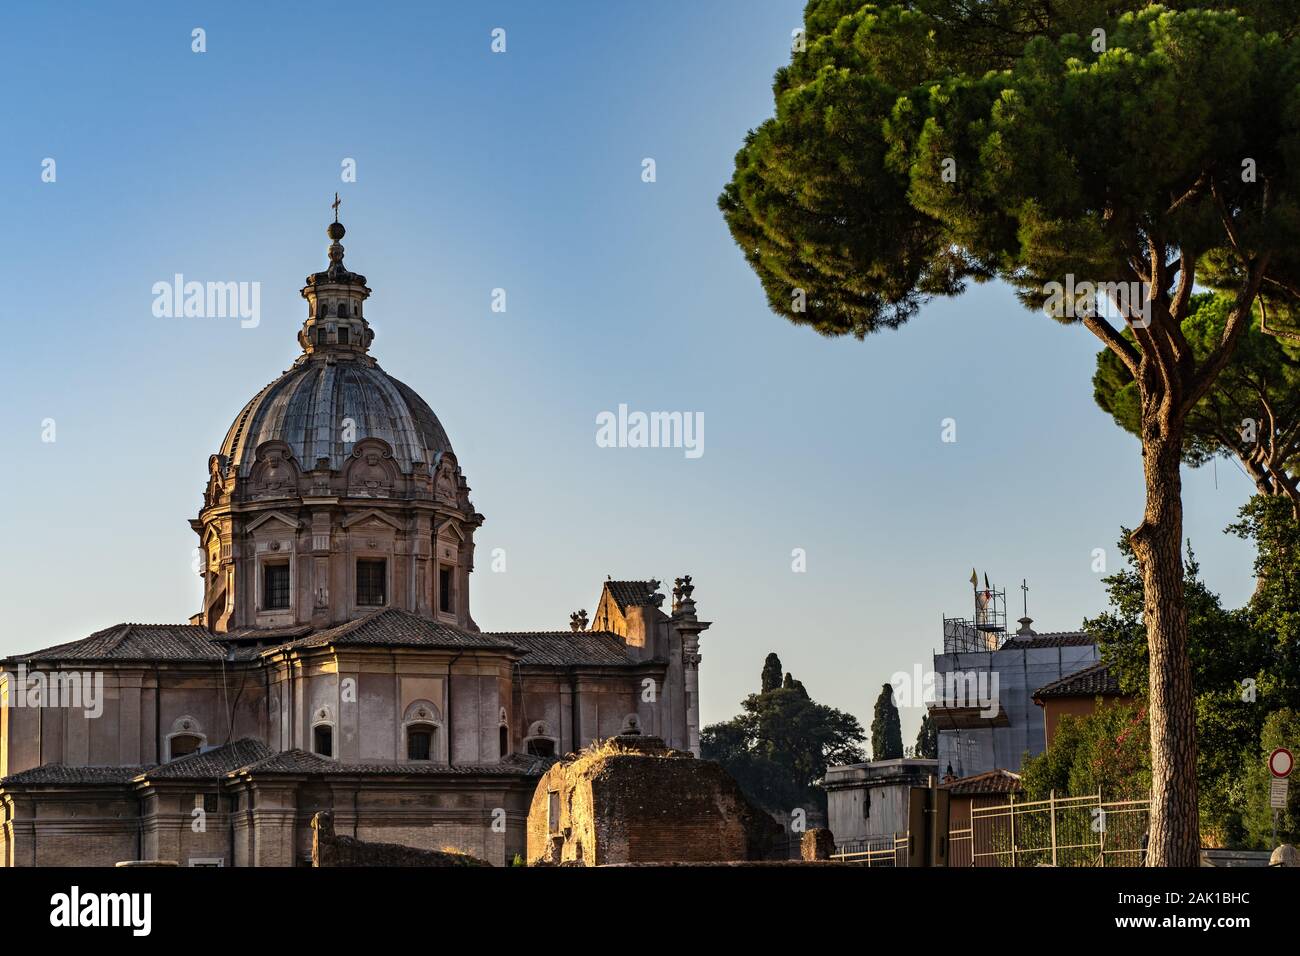 Dome of old historic catholic basilica in Rome. Green trees and dome of the church. Stock Photo